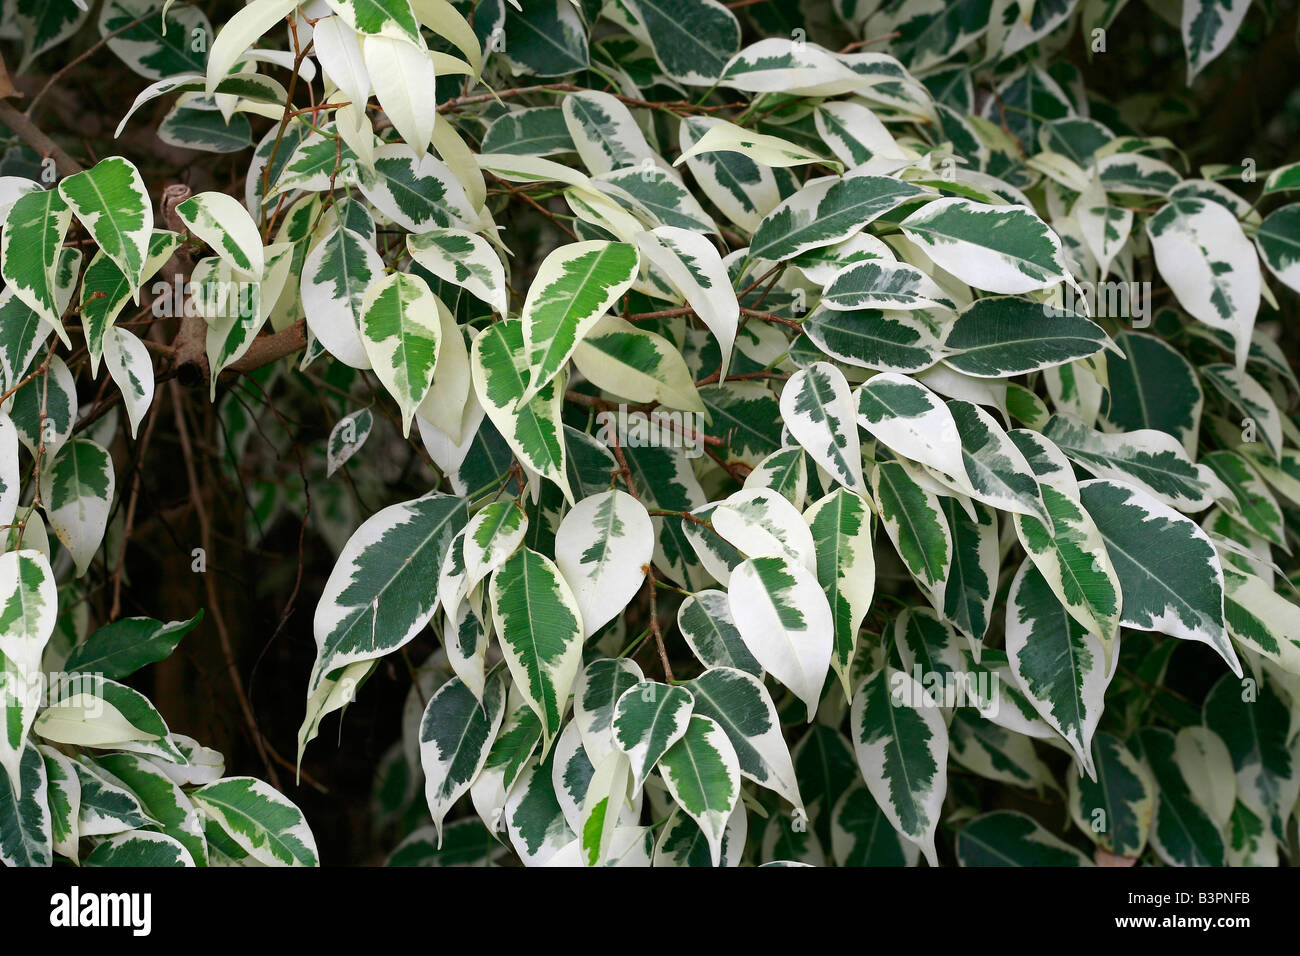 Ficus Variegata High Resolution Stock Photography and Images   Alamy